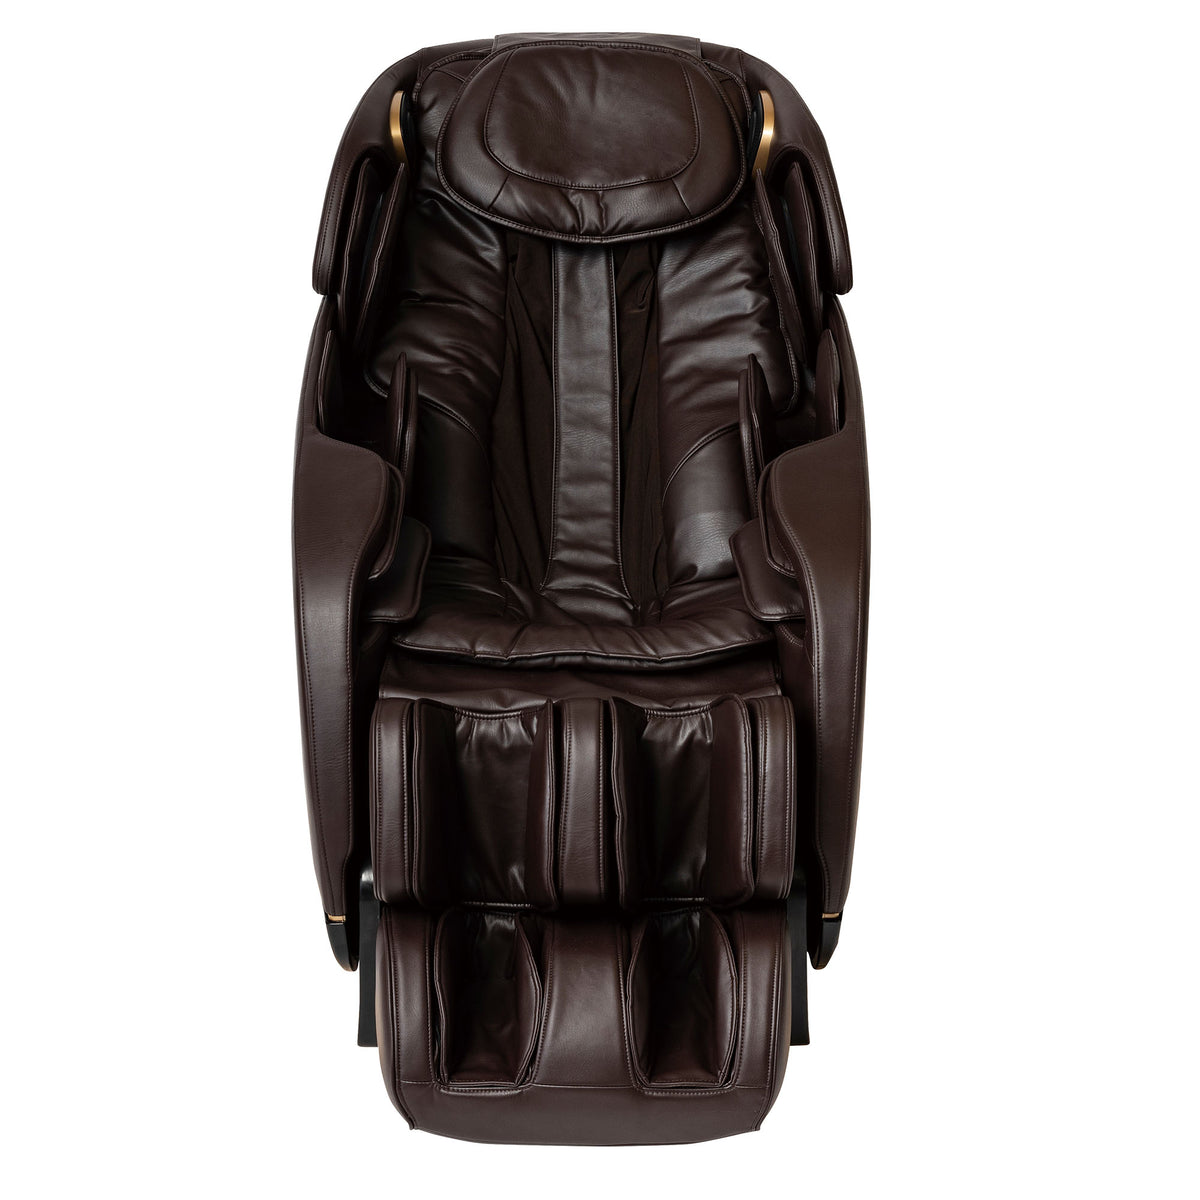 Profile view of the Inner Balance Wellness Jin 2.0 Massage Chair in luxurious brown leather